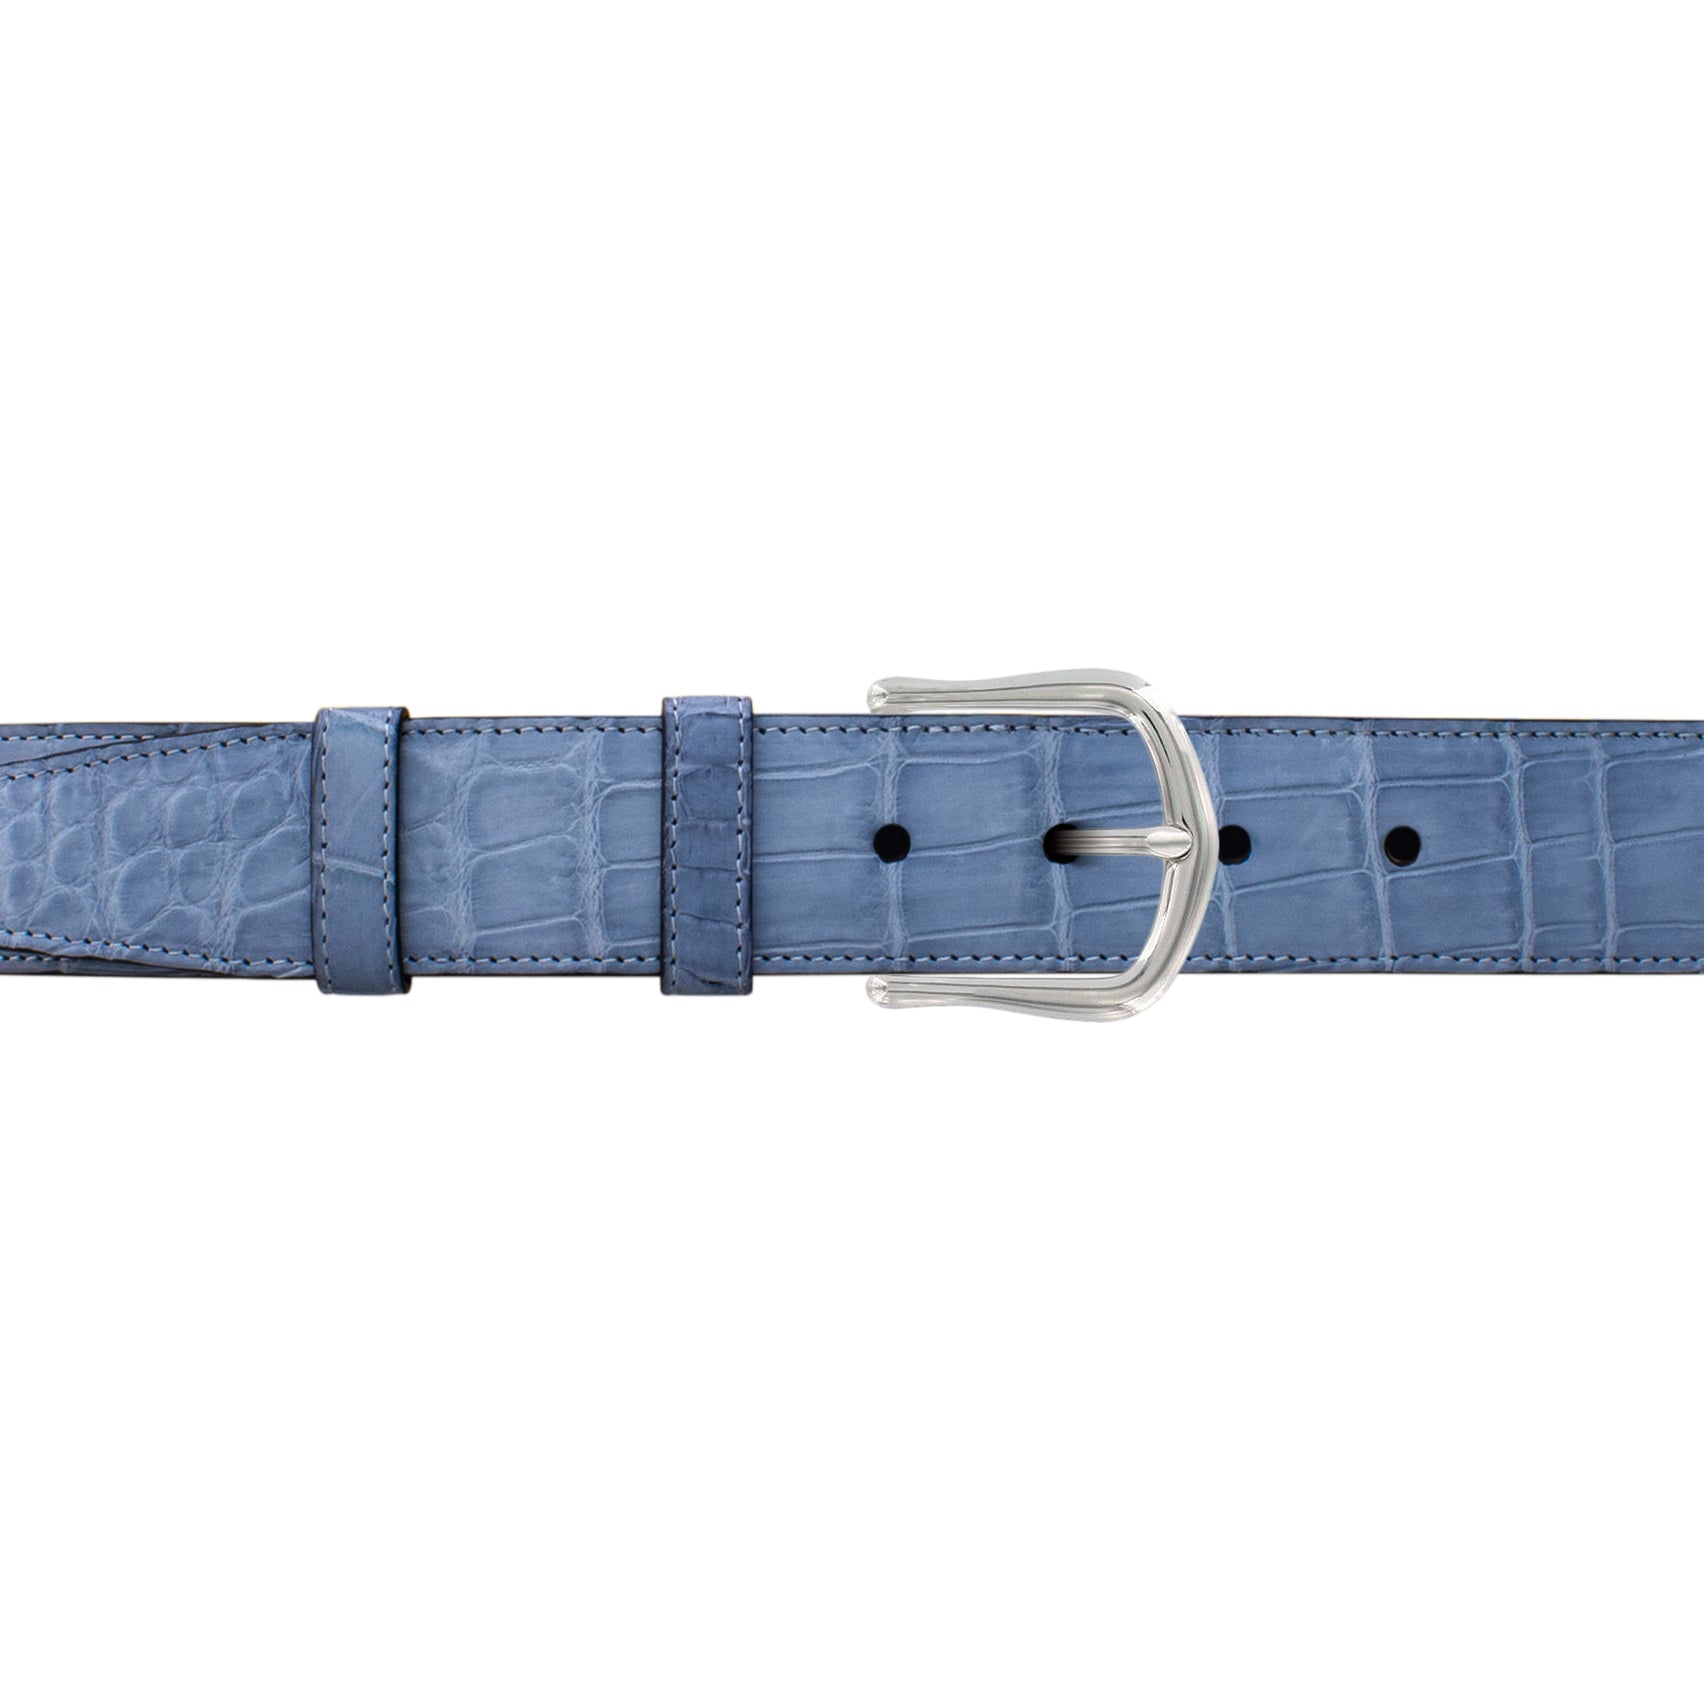 1 1/2" Arctic Classic Belt with Derby Cocktail Buckle in Polished Nickel